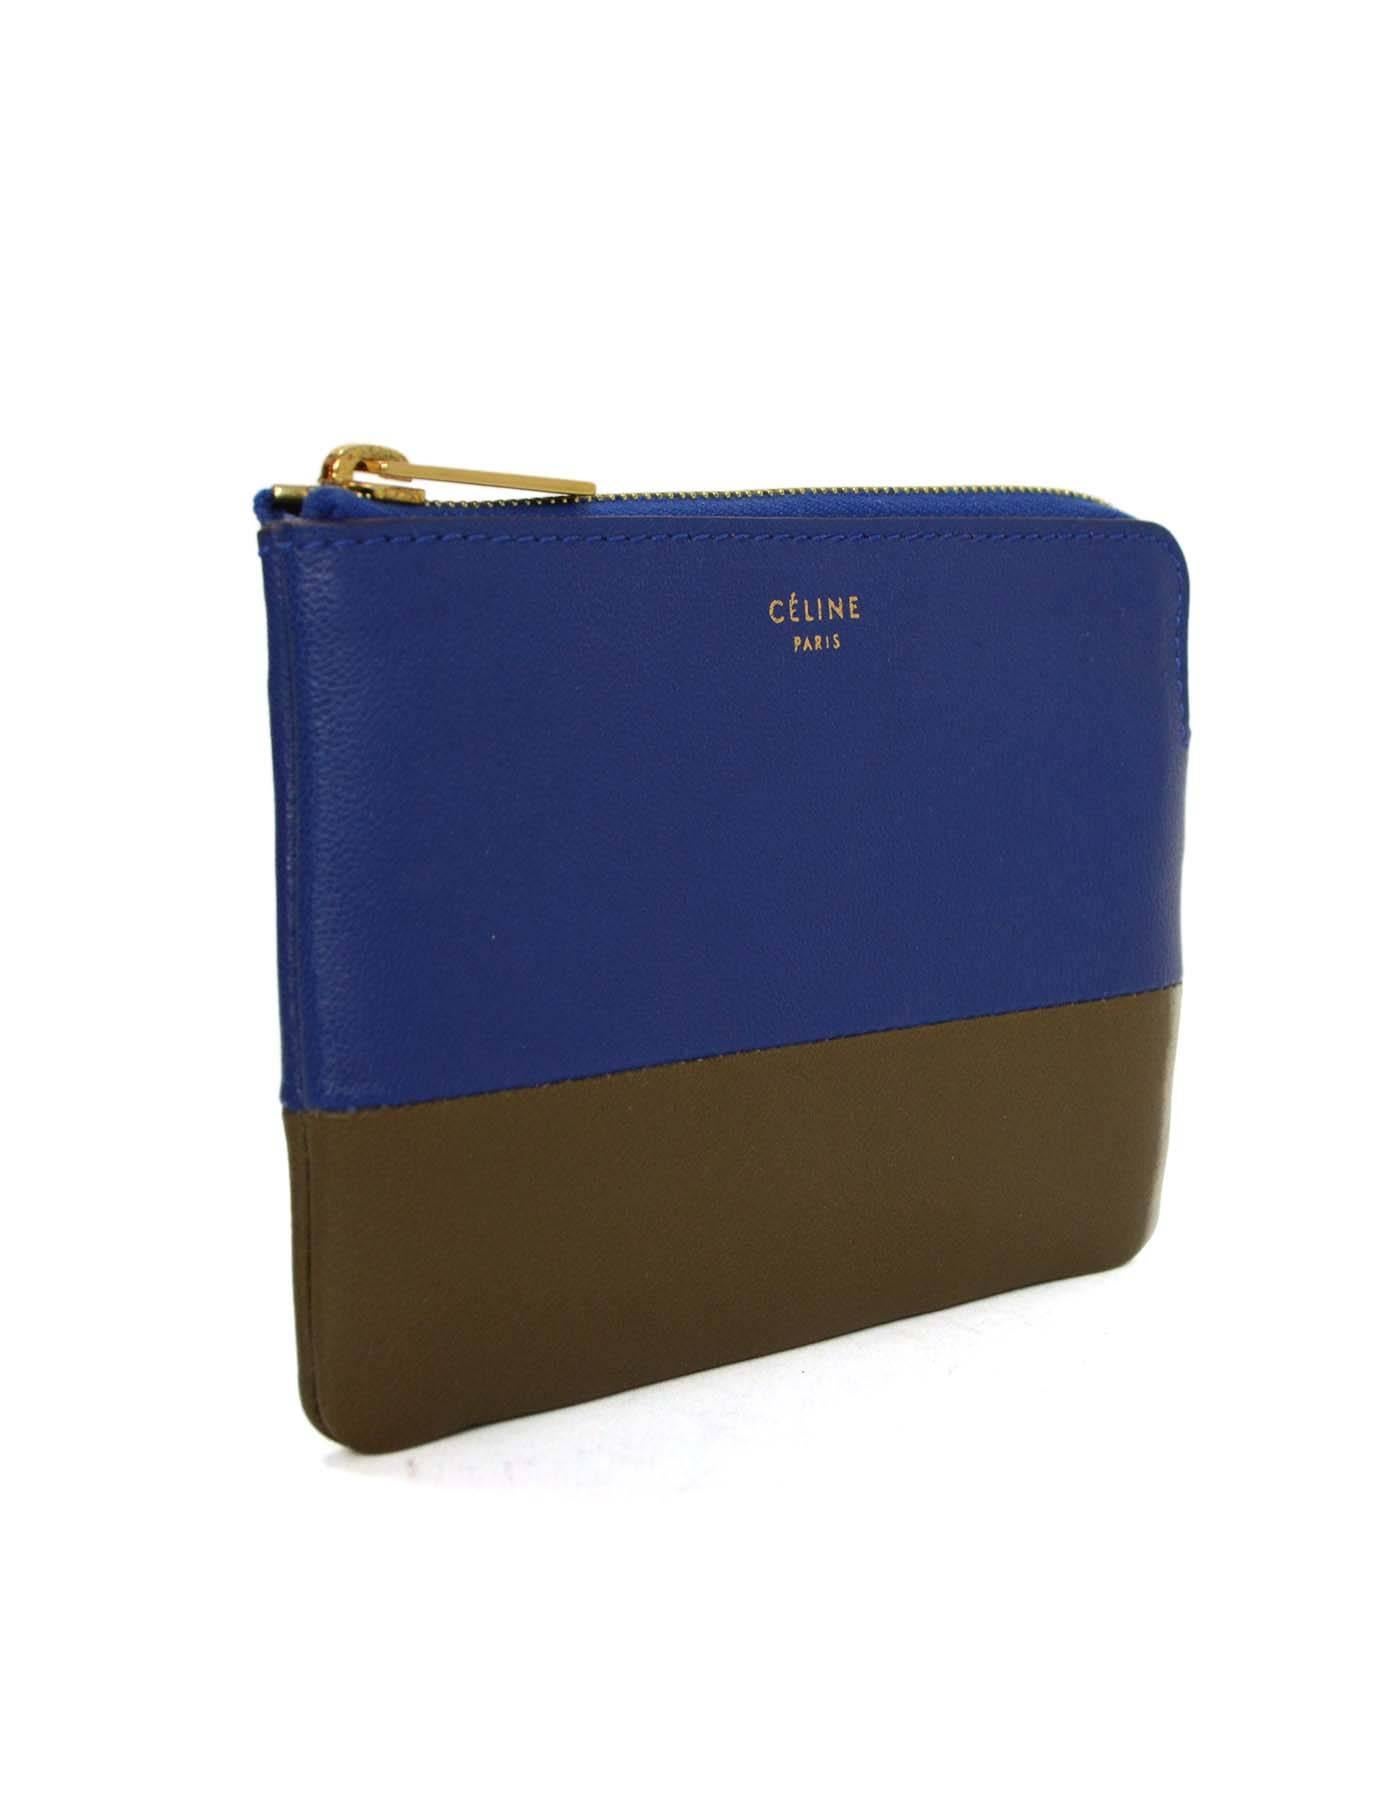 Celine Blue & Taupe Leather Coin Purse 
Made In: Italy
Color: Blue and taupe
Hardware: Goldtone
Materials: Leather
Closure/Opening: Zip across top
Exterior Pockets: None
Interior Pockets: None
Overall Condition: Exellent pre-owned